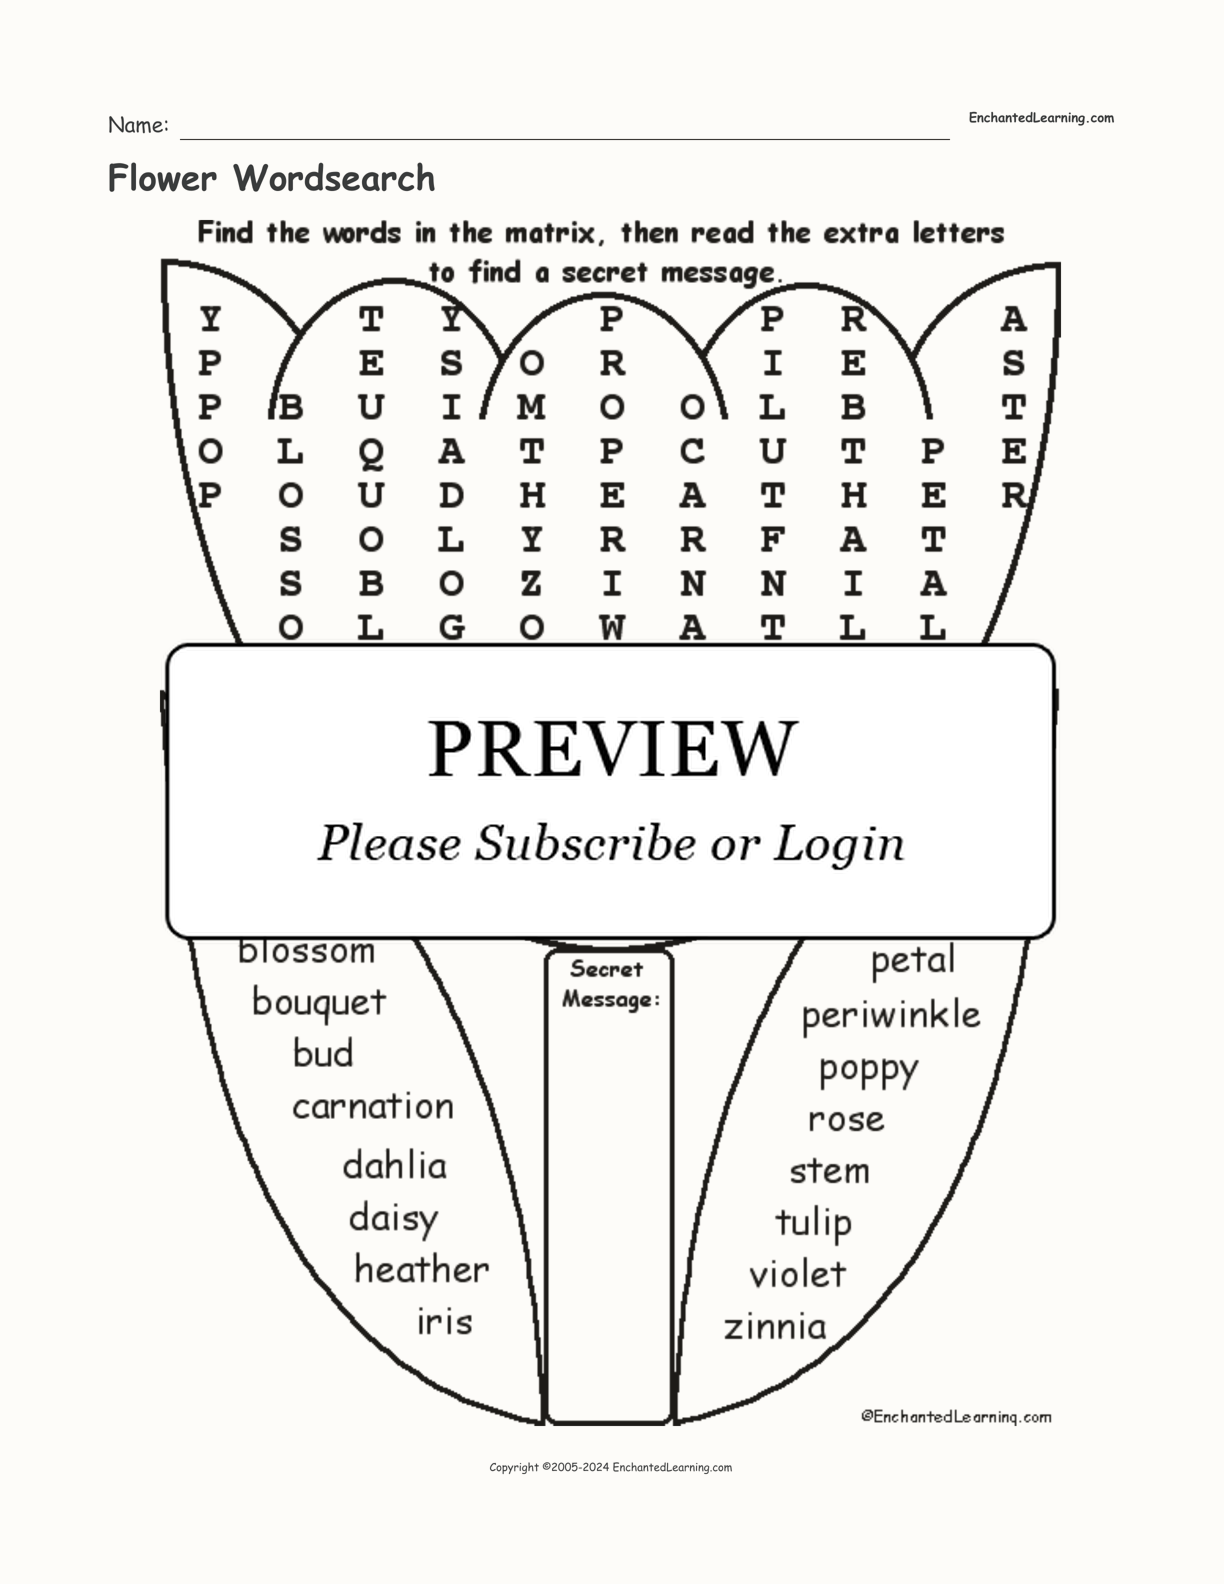 Flower Wordsearch interactive worksheet page 1